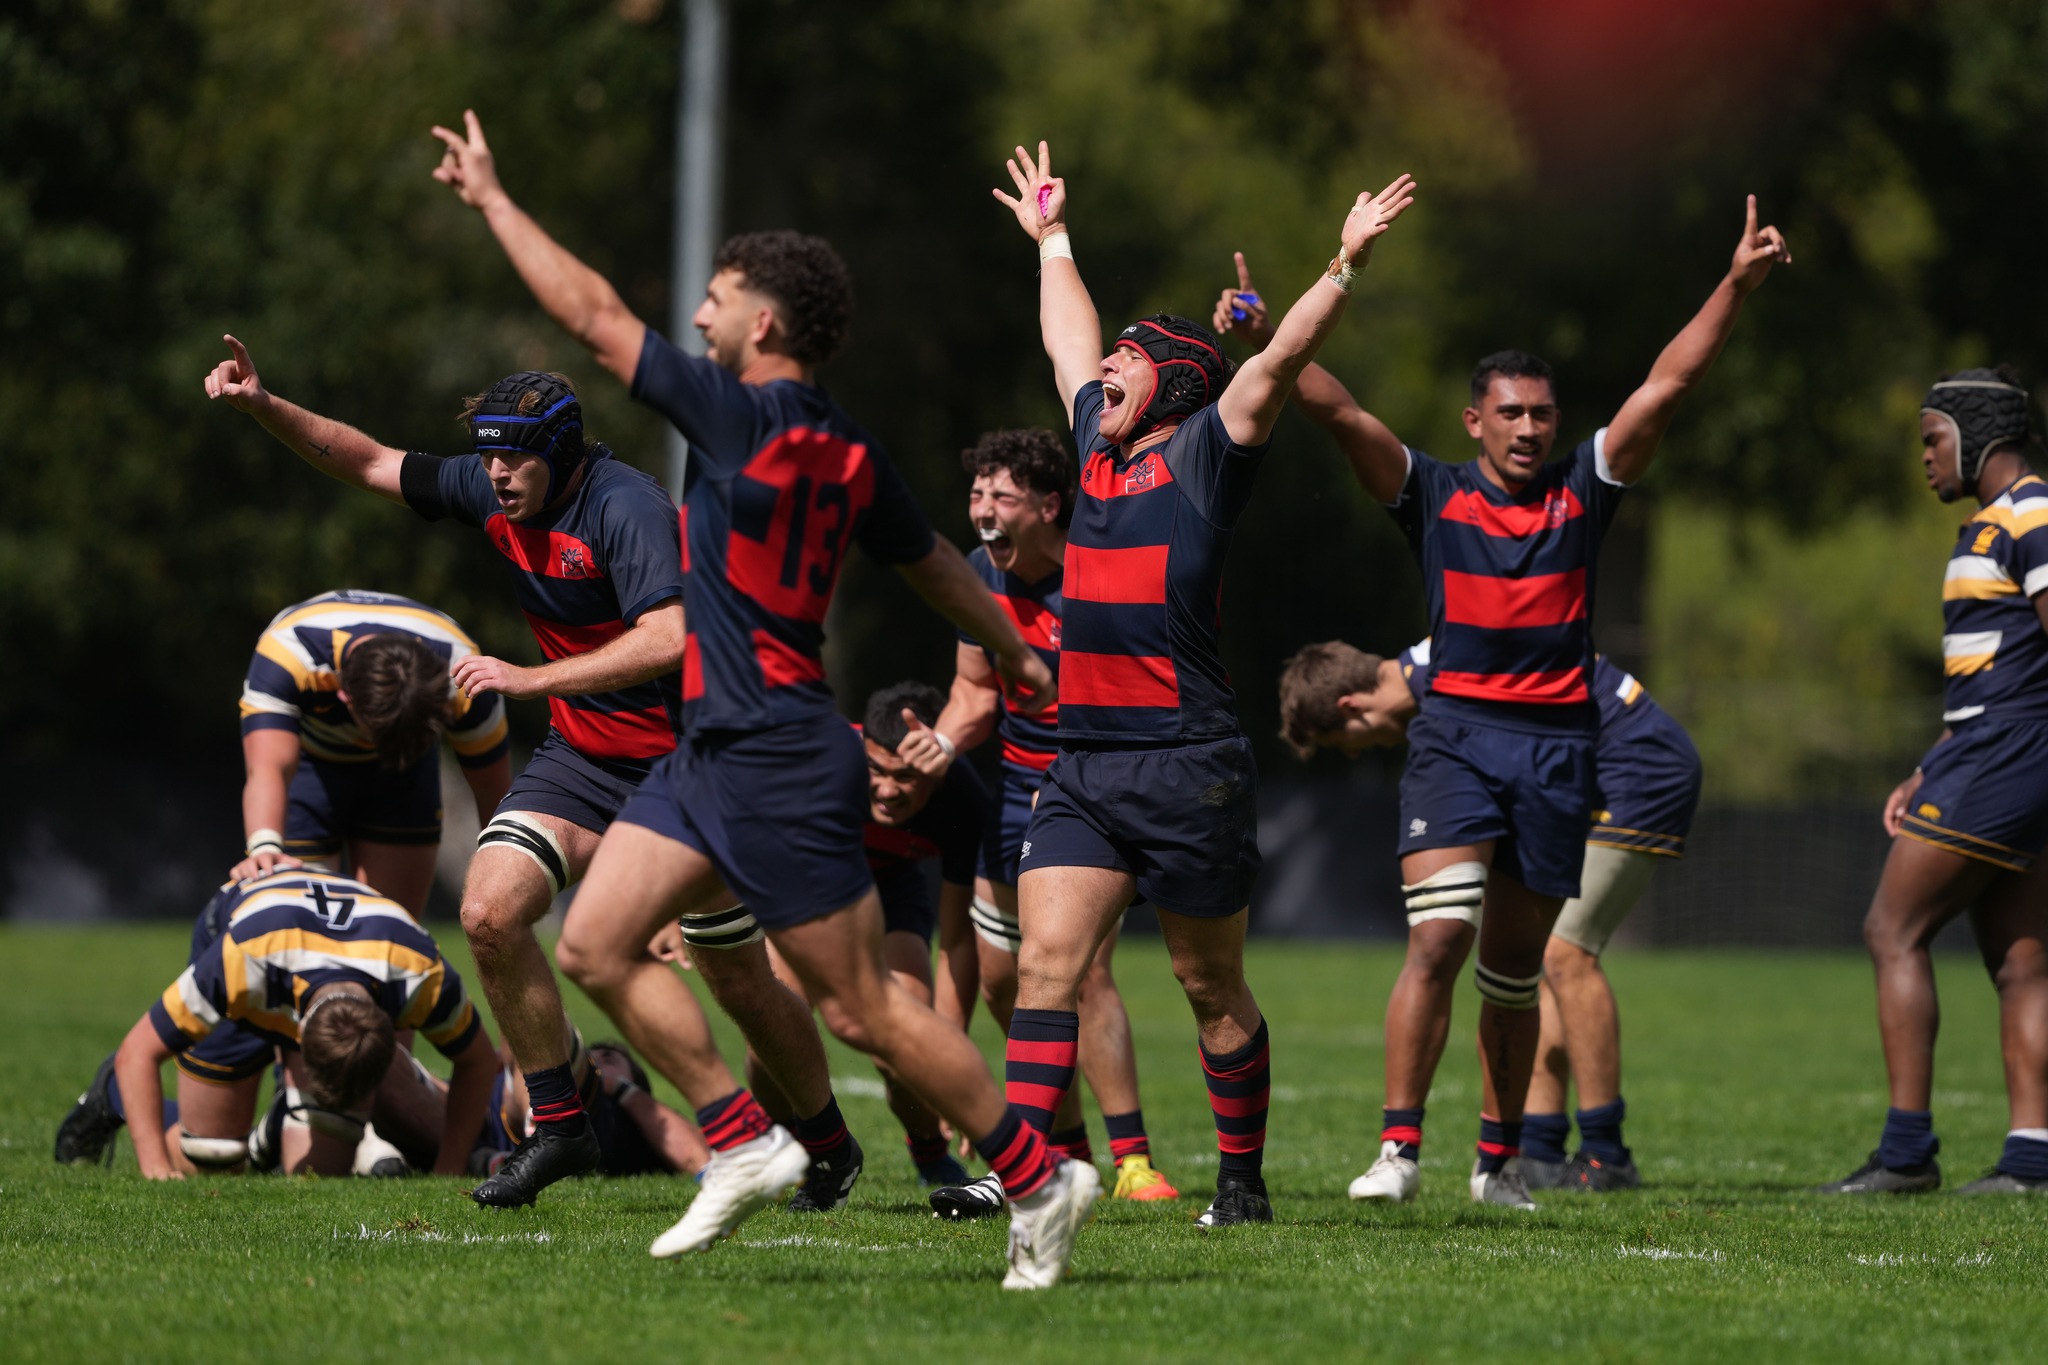 Gaels Celebrate after the Men's Rugby game